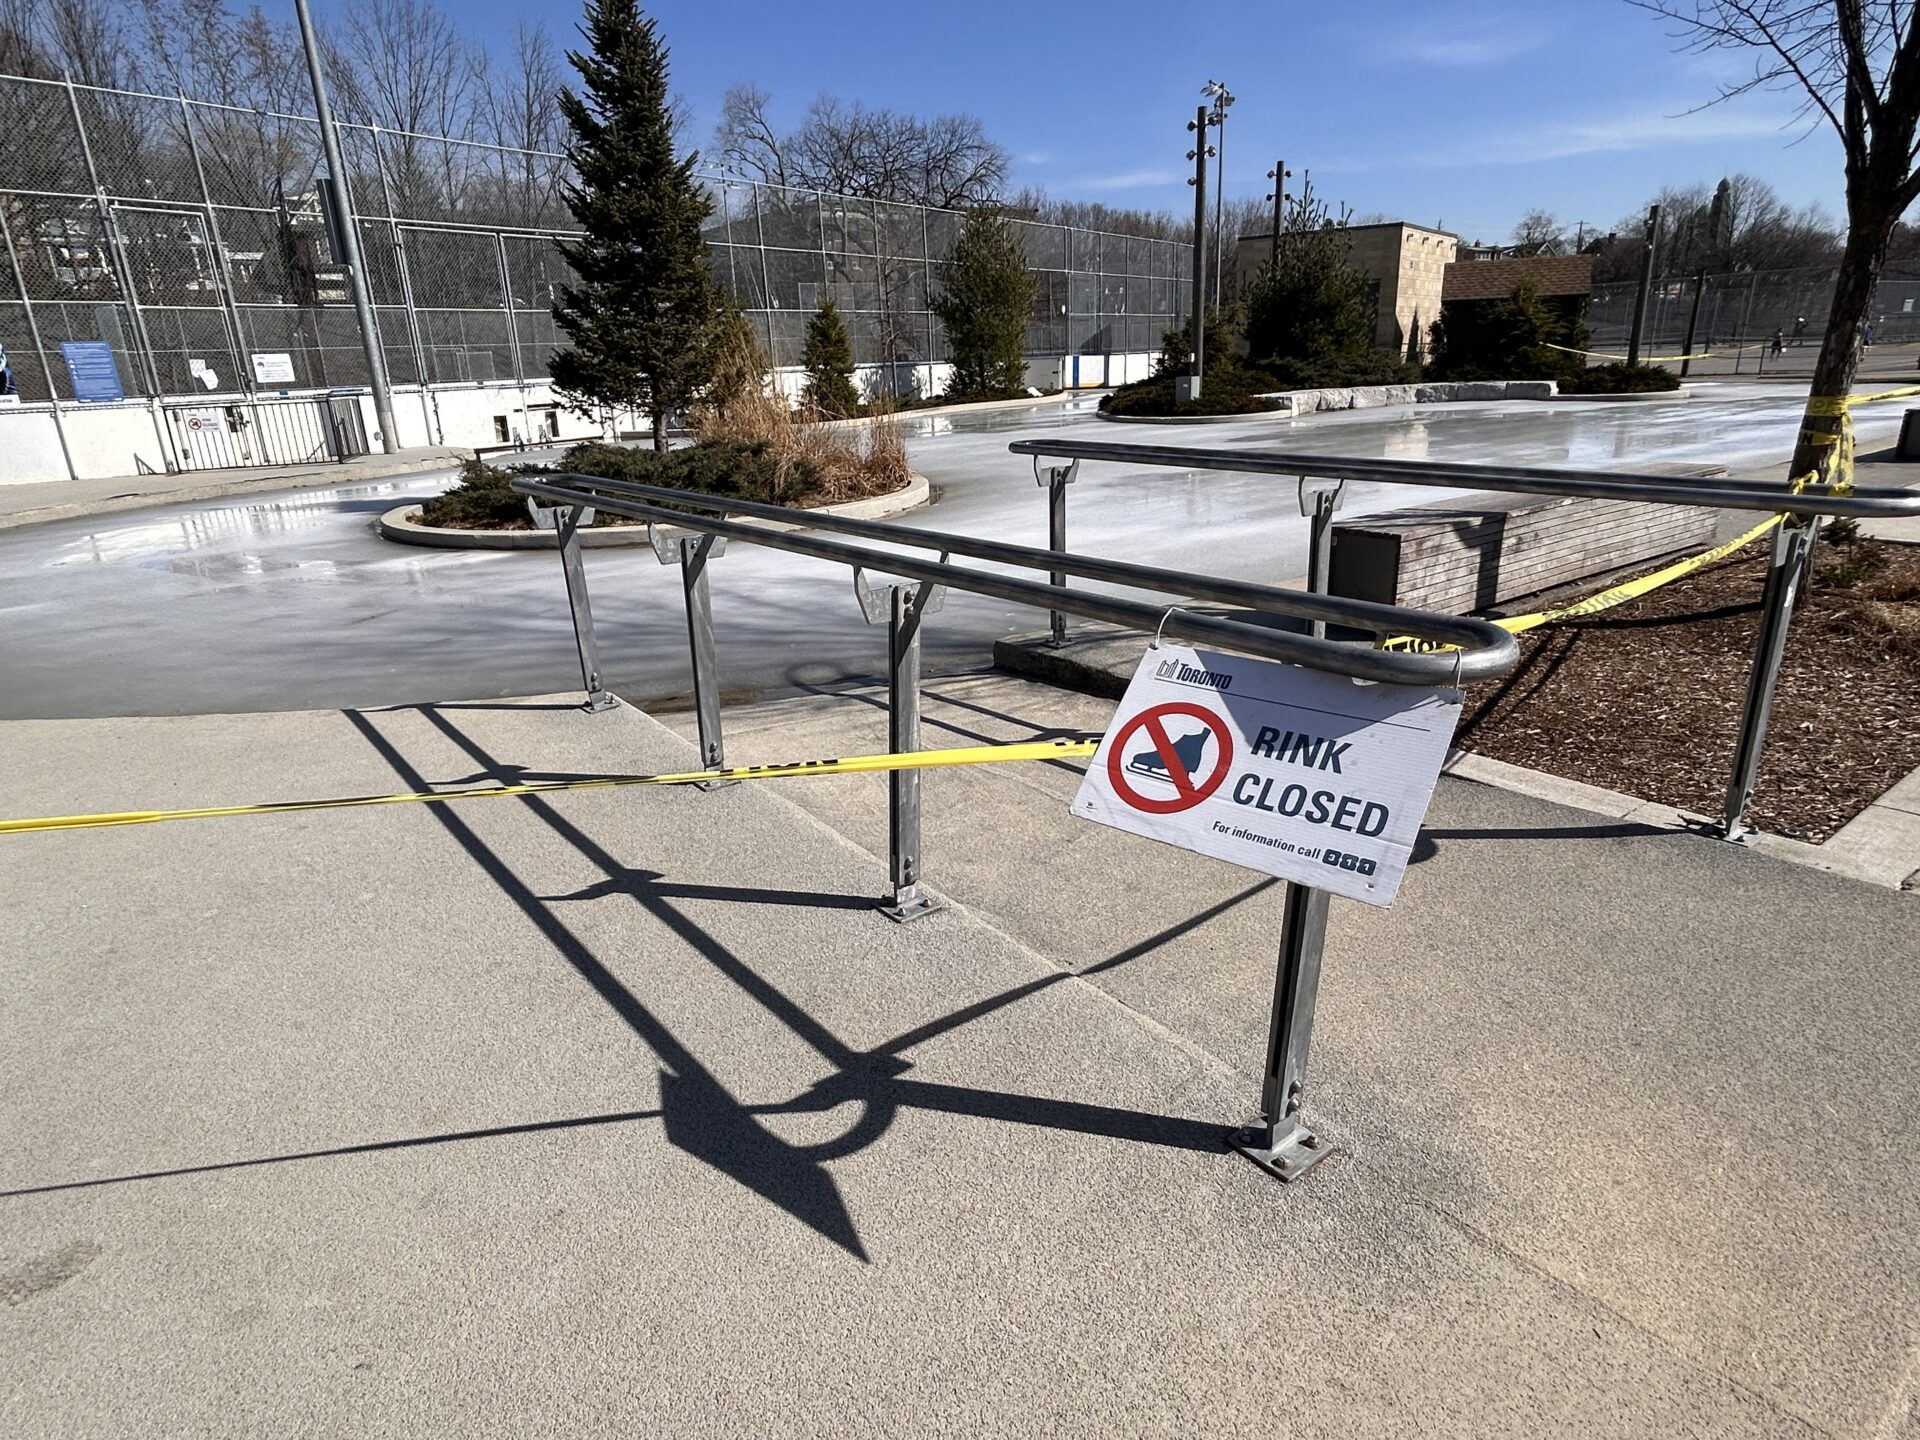 Riverdale Park East ice rink is closed with yellow tape surrounding  the rink